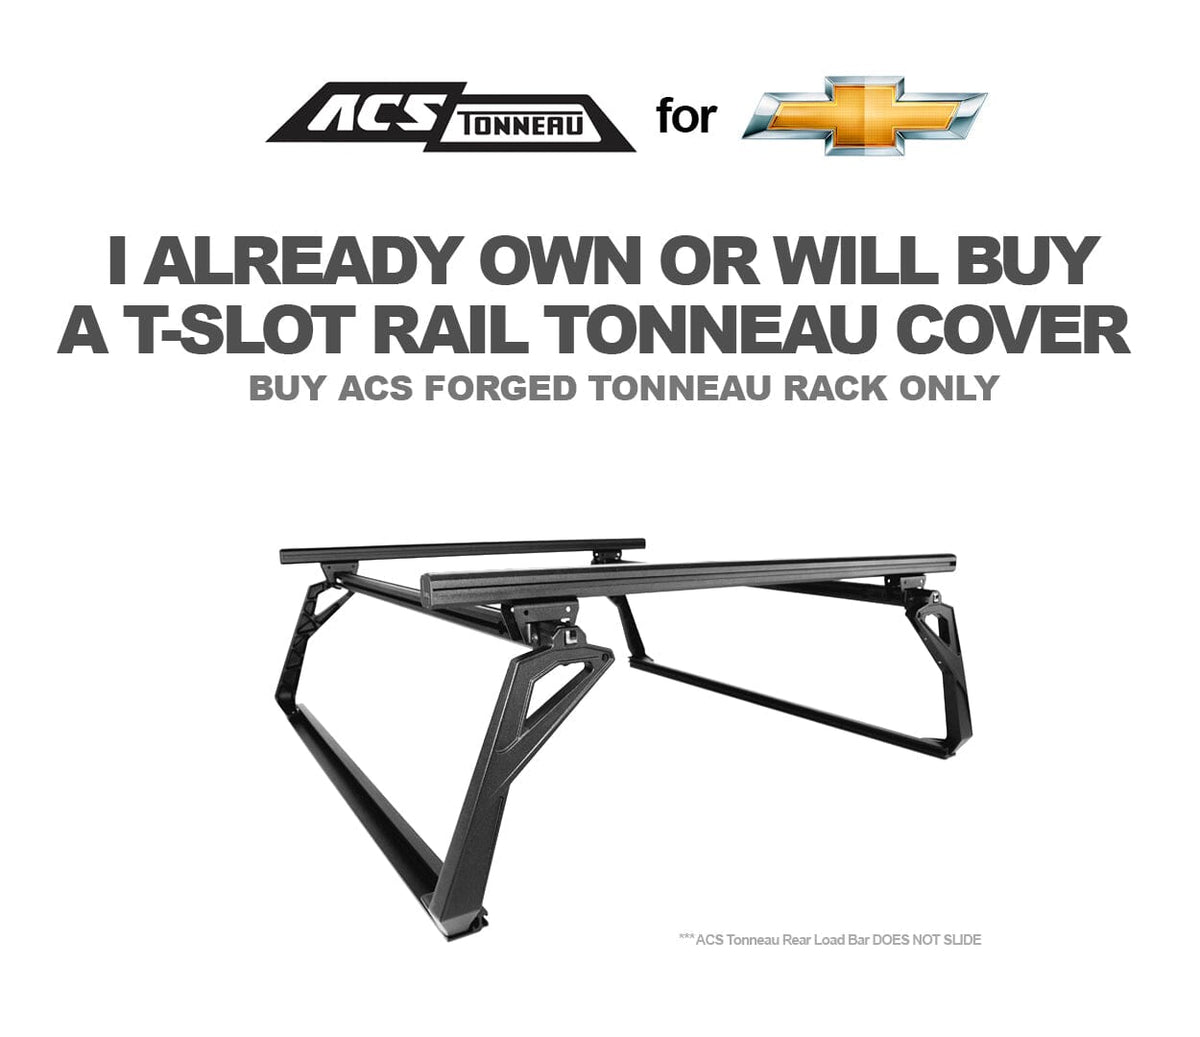 ACS Forged Tonneau - Rack Only - Chevrolet  active-cargo-system Leitner Designs- Adventure Imports